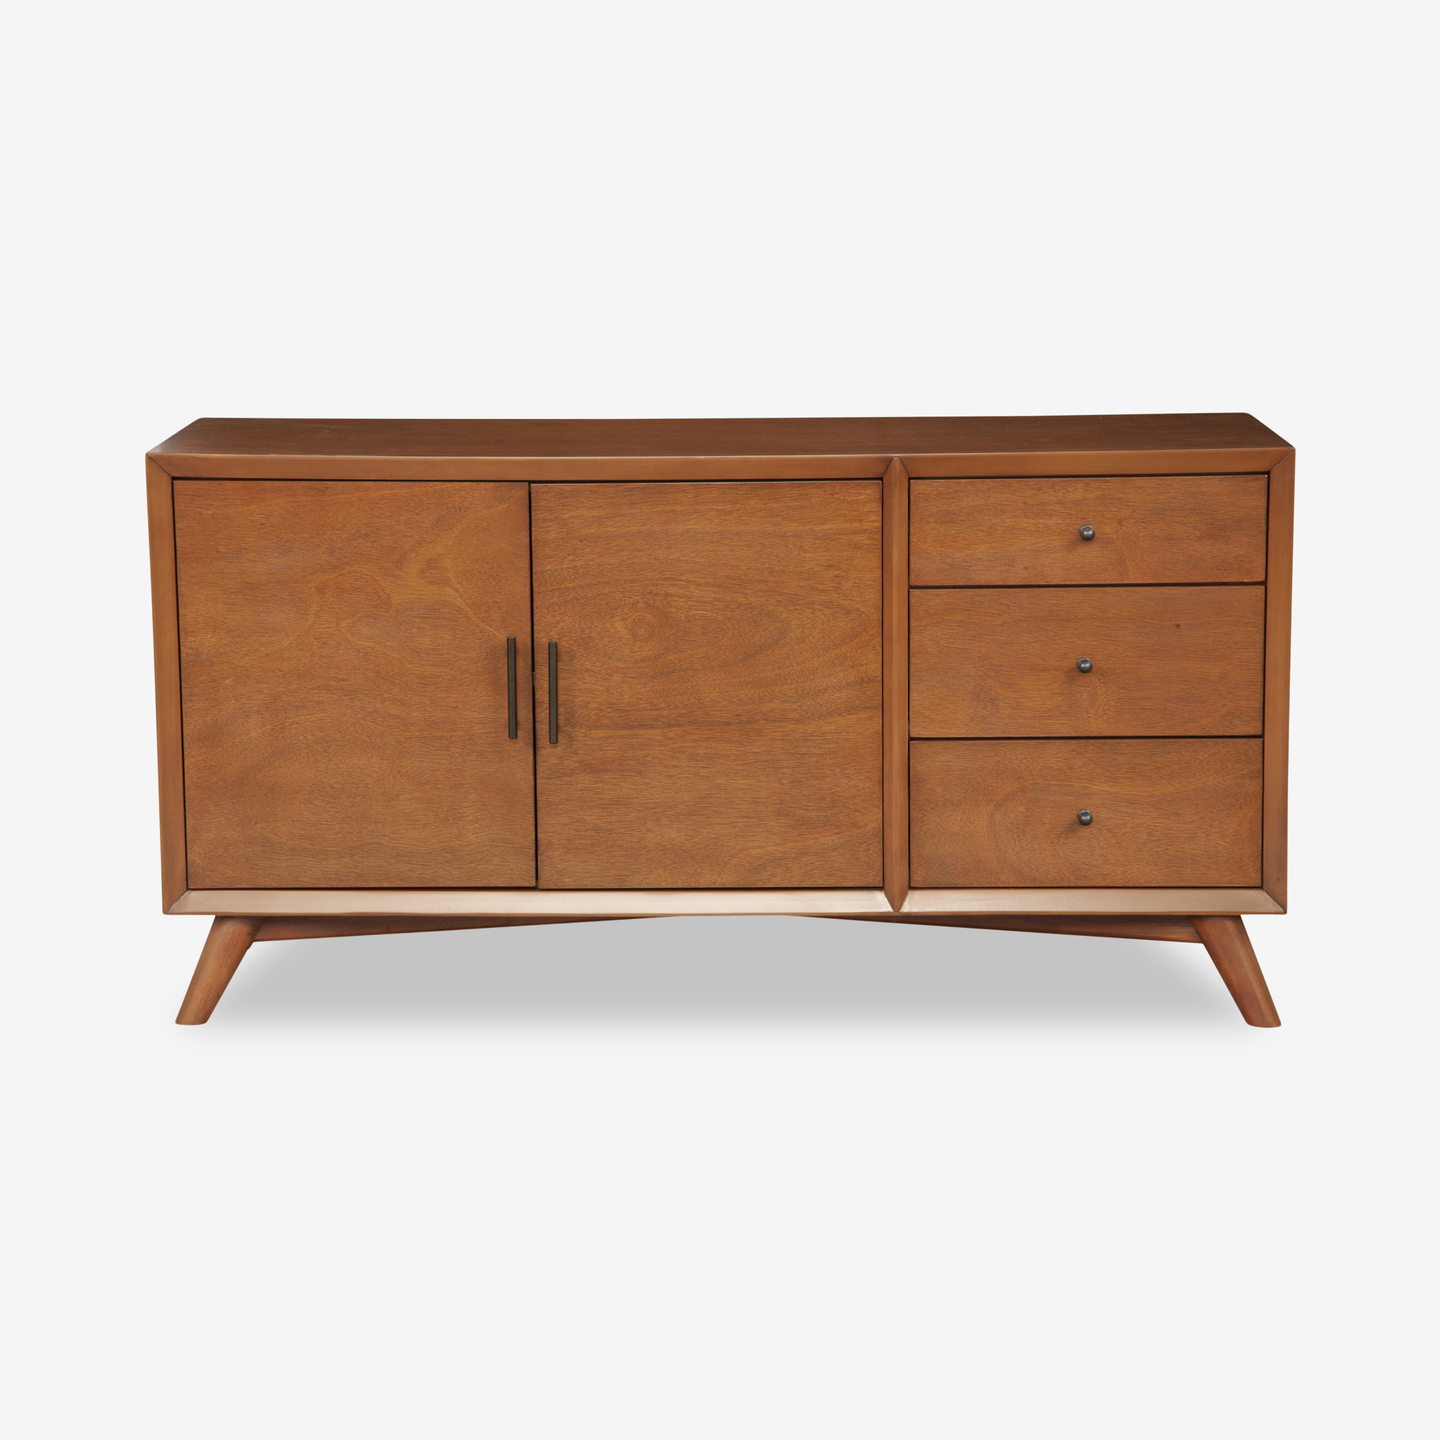 1401_Cheney-Sideboard-Acorn_Front_2021